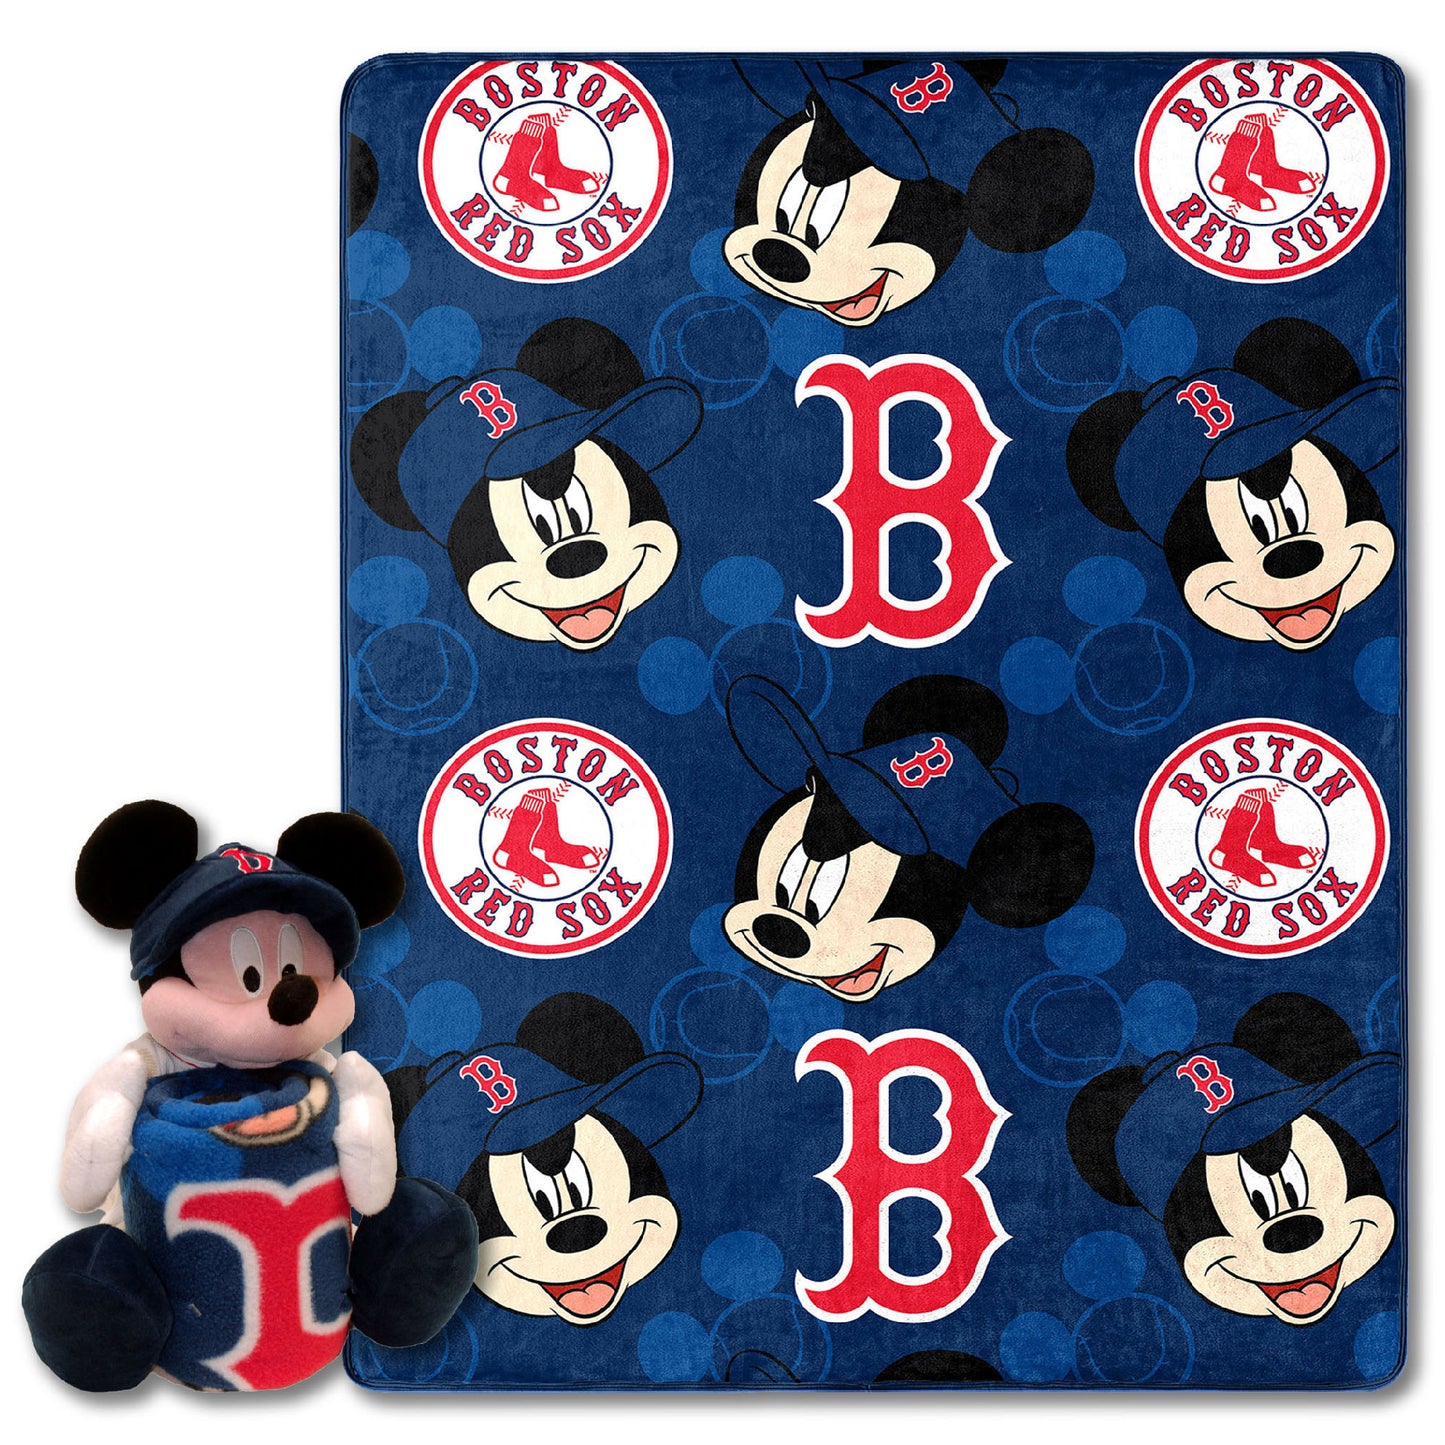 Red Sox OFFICIAL MLB & Disney's Mickey Mouse Character Hugger Pillow & Silk Touch Throw Set;  40" x 50"